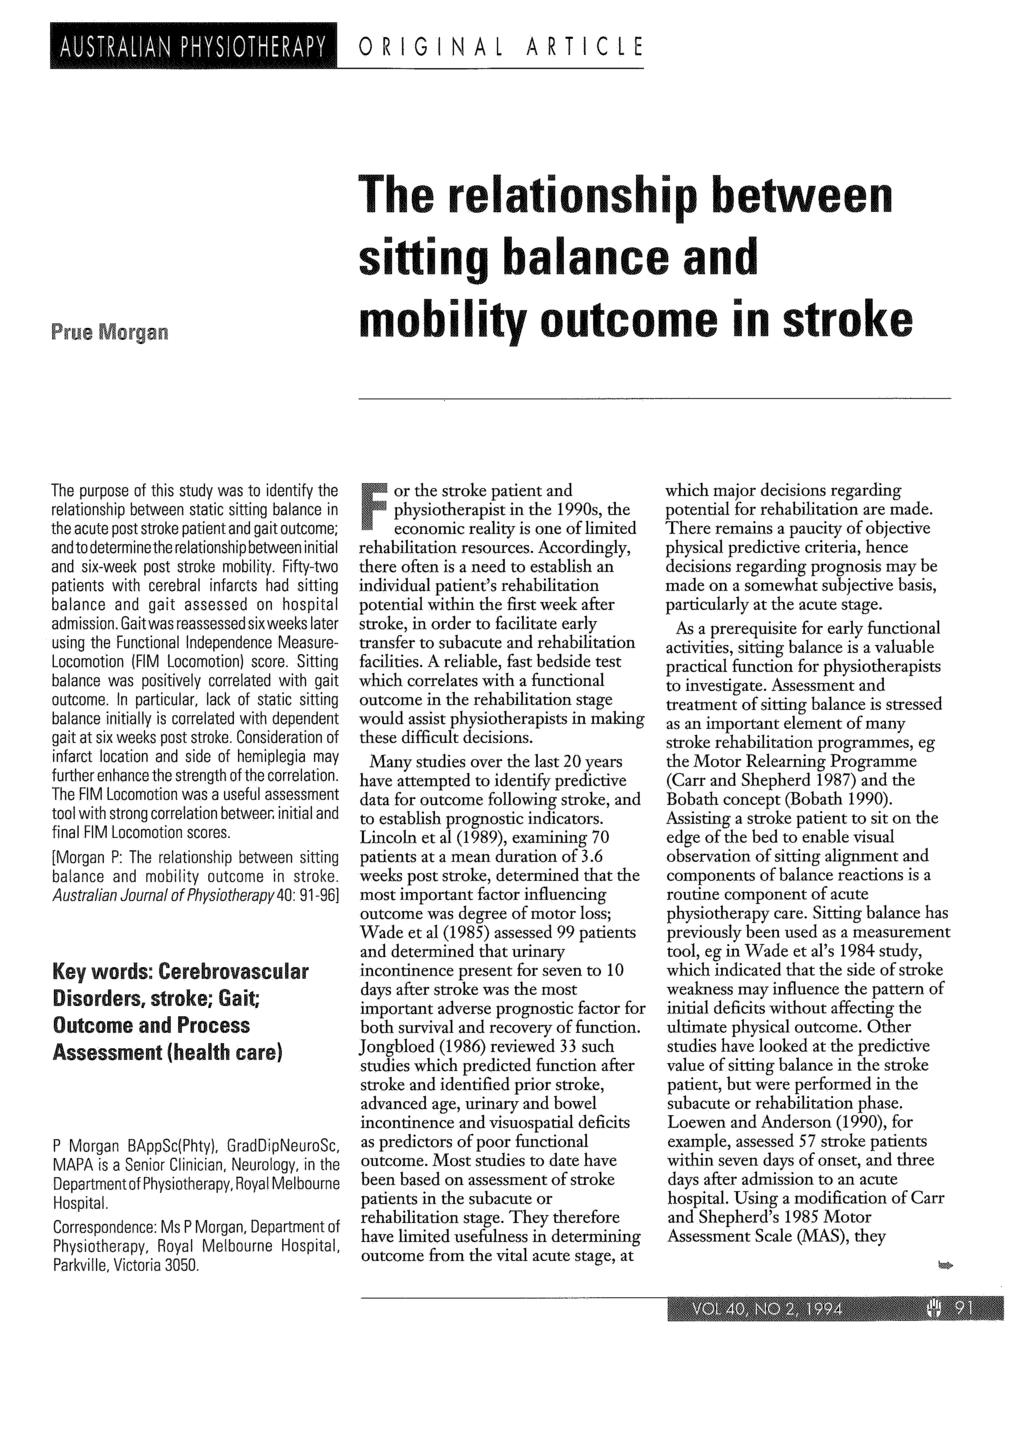 Prue Morgan The relationship between sitting balance and mobility outcome in stroke The purpose of this study was to identify the relationship between static sitting balance in the acute post stroke